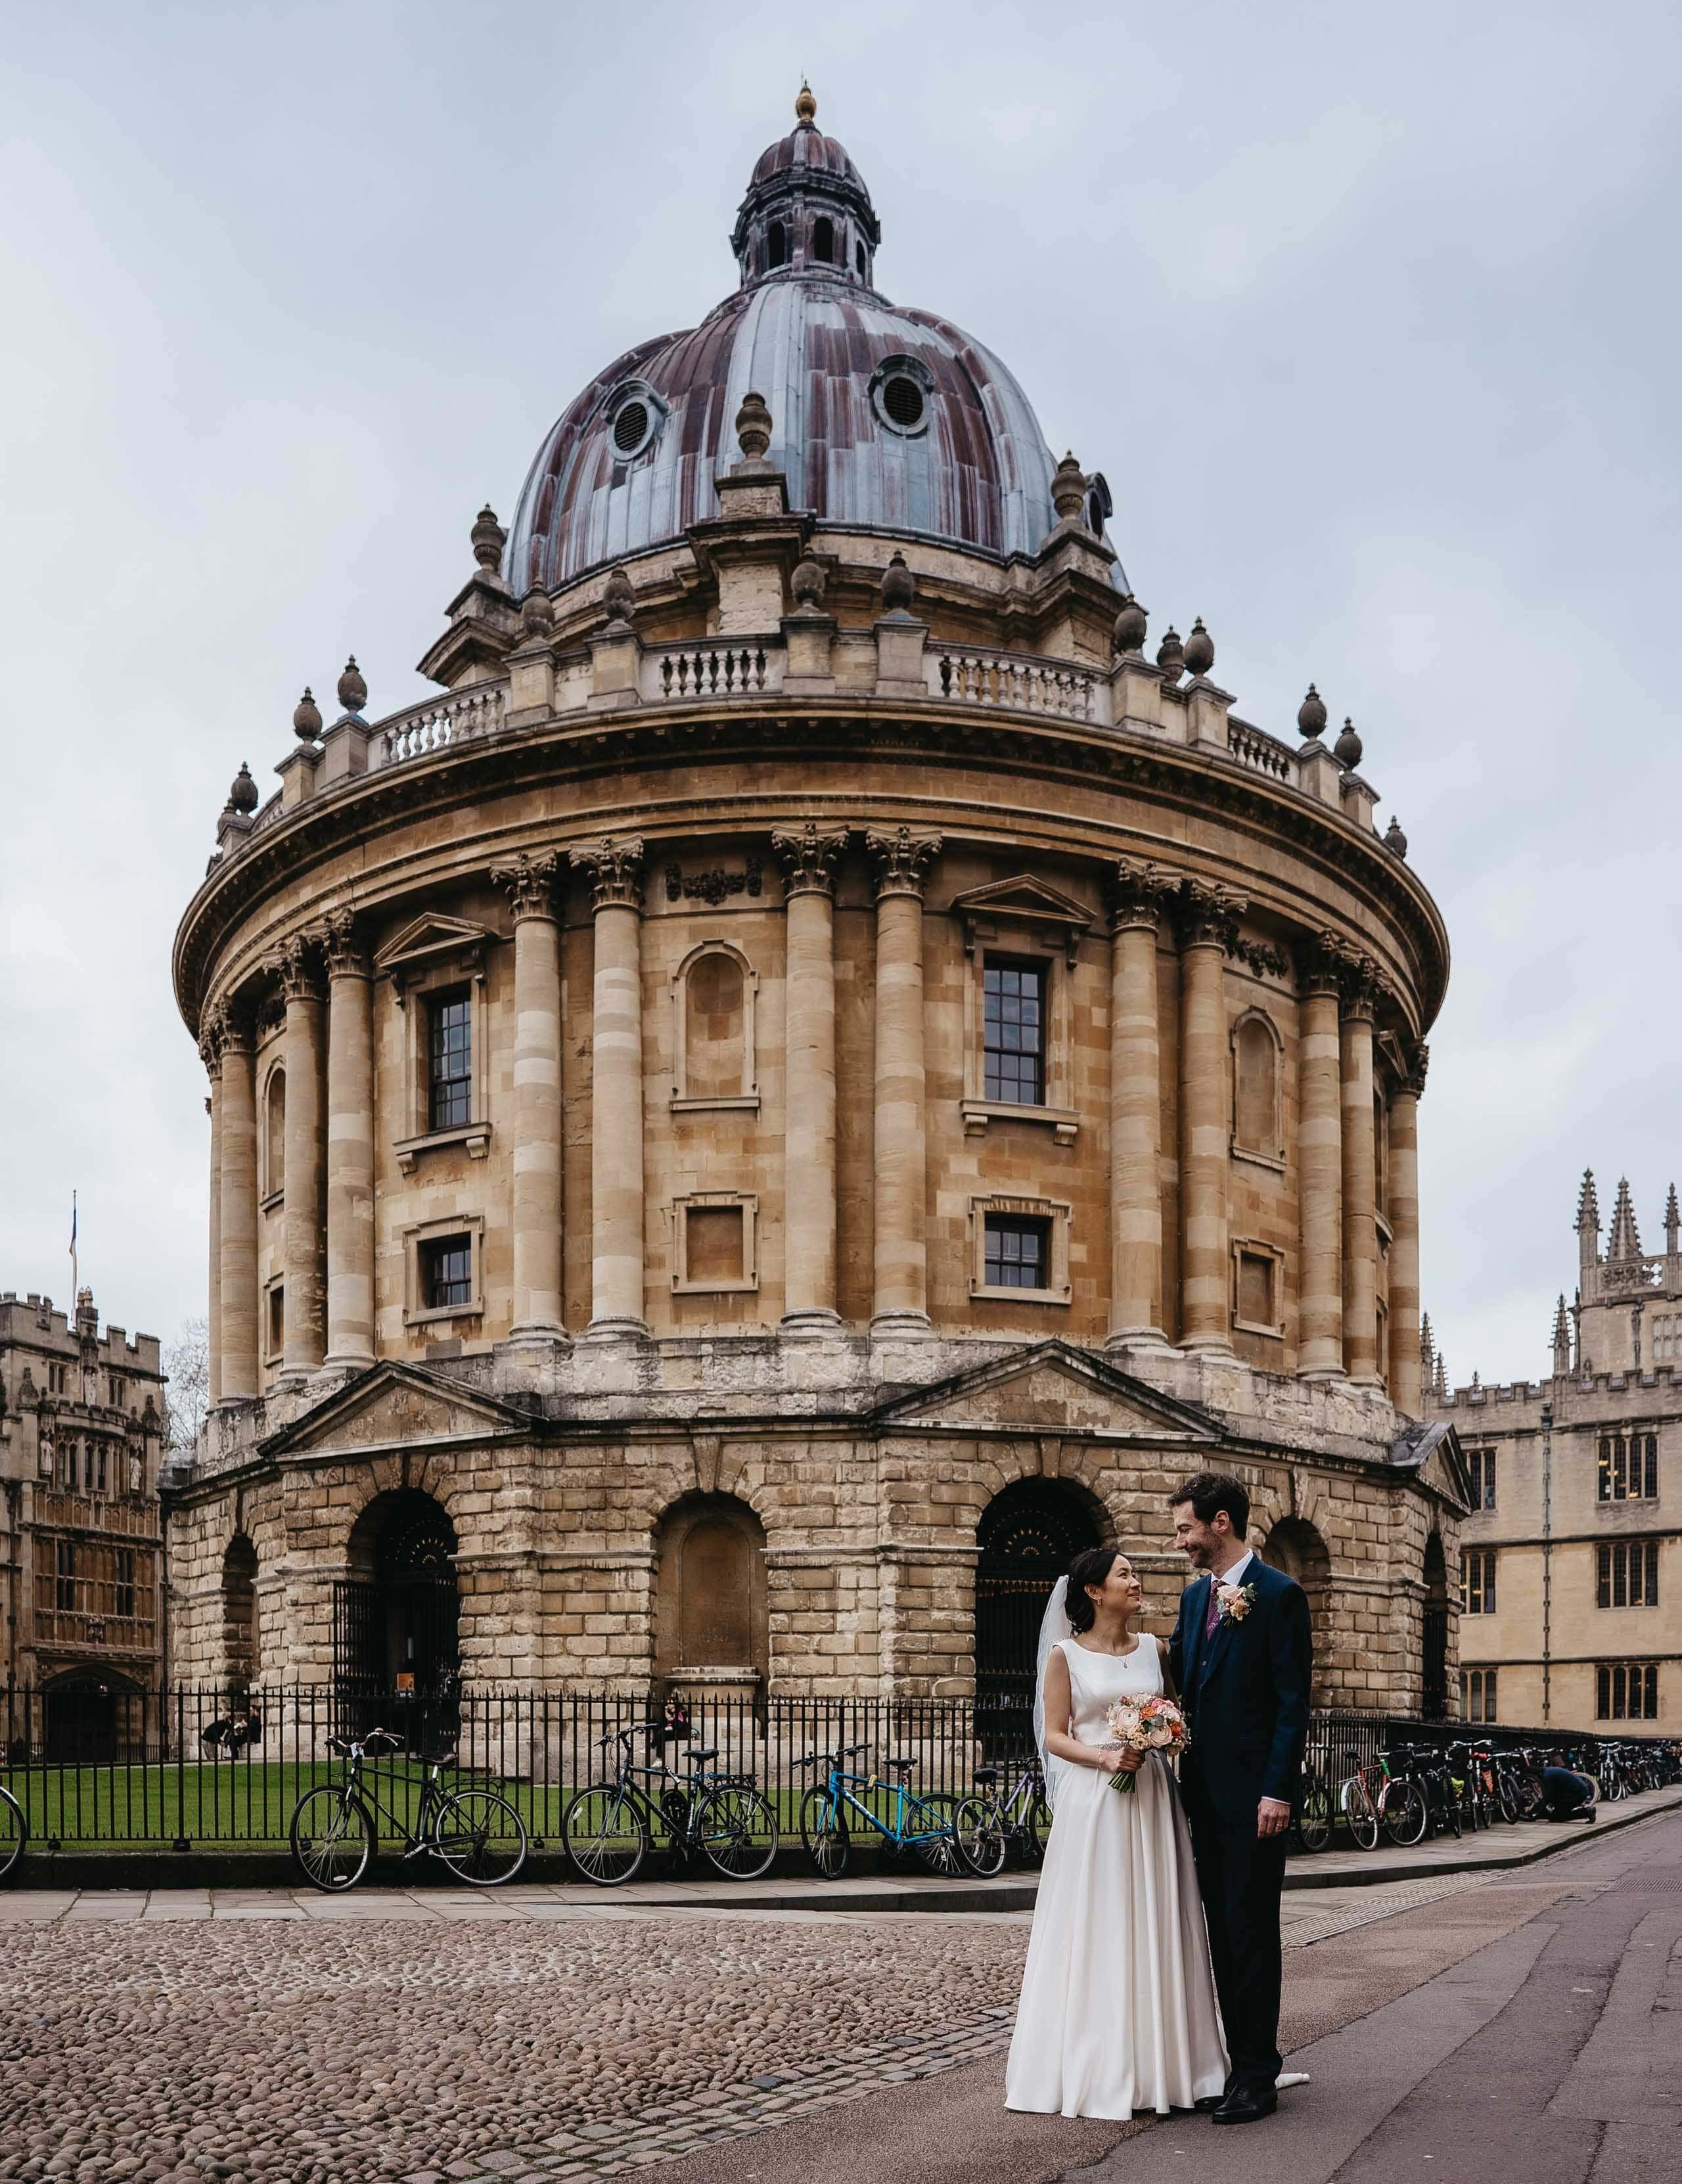 ConnieAndrewcolour-196-2022-Radcliffe-Square-Oxford-High-Res-Wedding-Couple-Guests-Friends-Family-Web-Hero-aspect-ratio-2560-3324